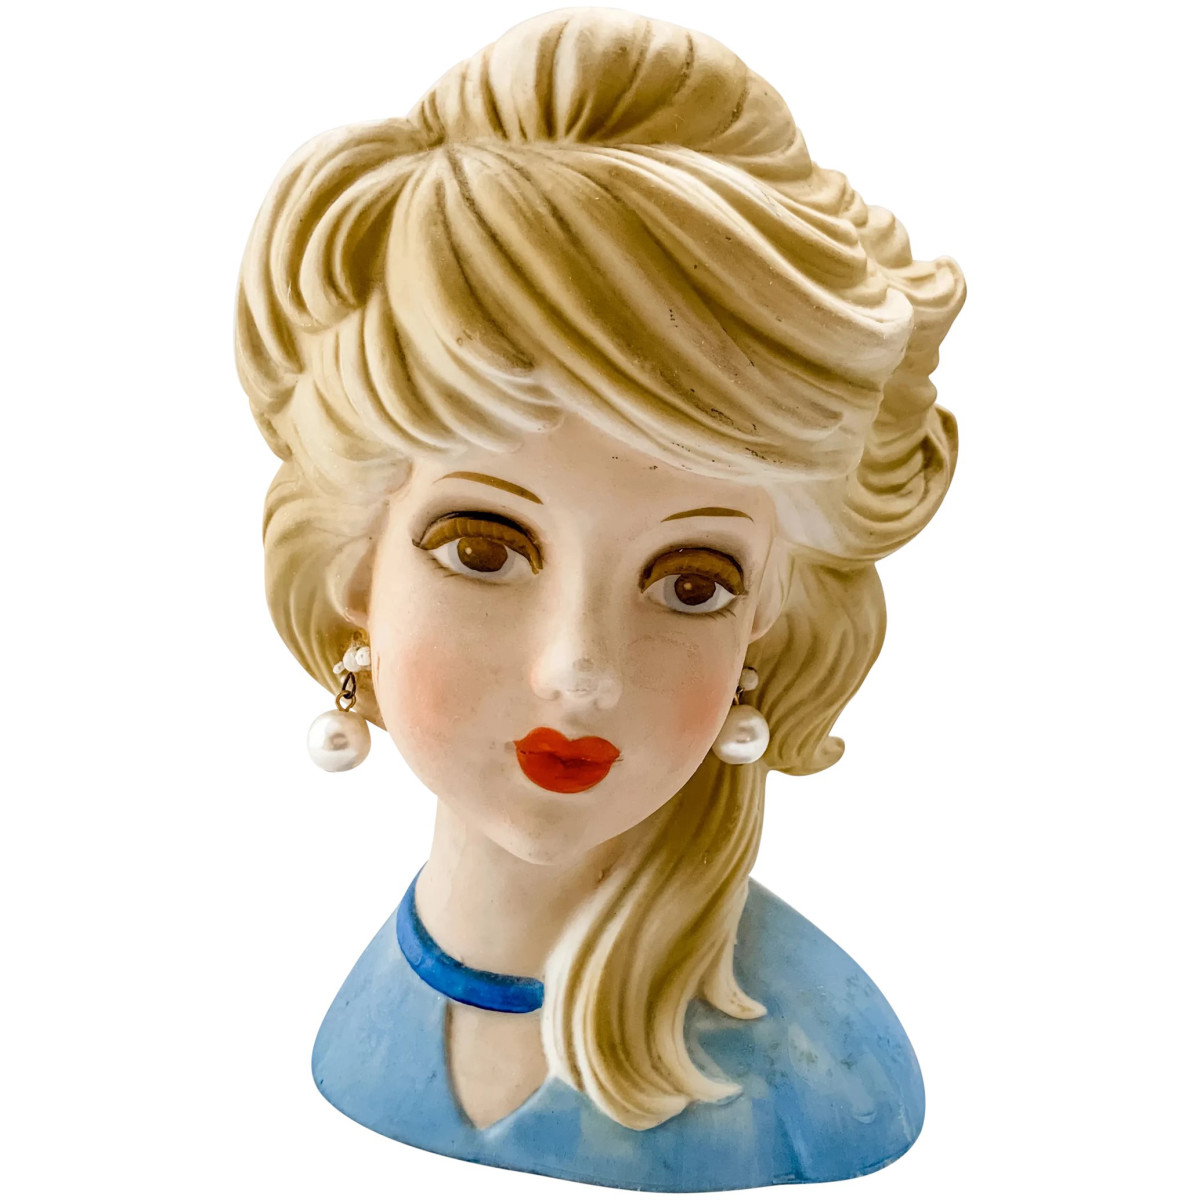 Elusive Inarco E-6210 head vase dubbed the “Ghost Girl” or “Ghost Sister” by collectors because of her light matte coloring and is a scarce find. Circa 1950s-60s, she has a medium-blue bodice with a deeper blue narrow collar topping a peek-a-boo V in the front of her gown, large pearl drop earrings, side-swept blonde hair, mark reads “Inarco® E6210” with an elliptical world map, 7” h, base is 4-1/4” x 2-3/4”; $275.